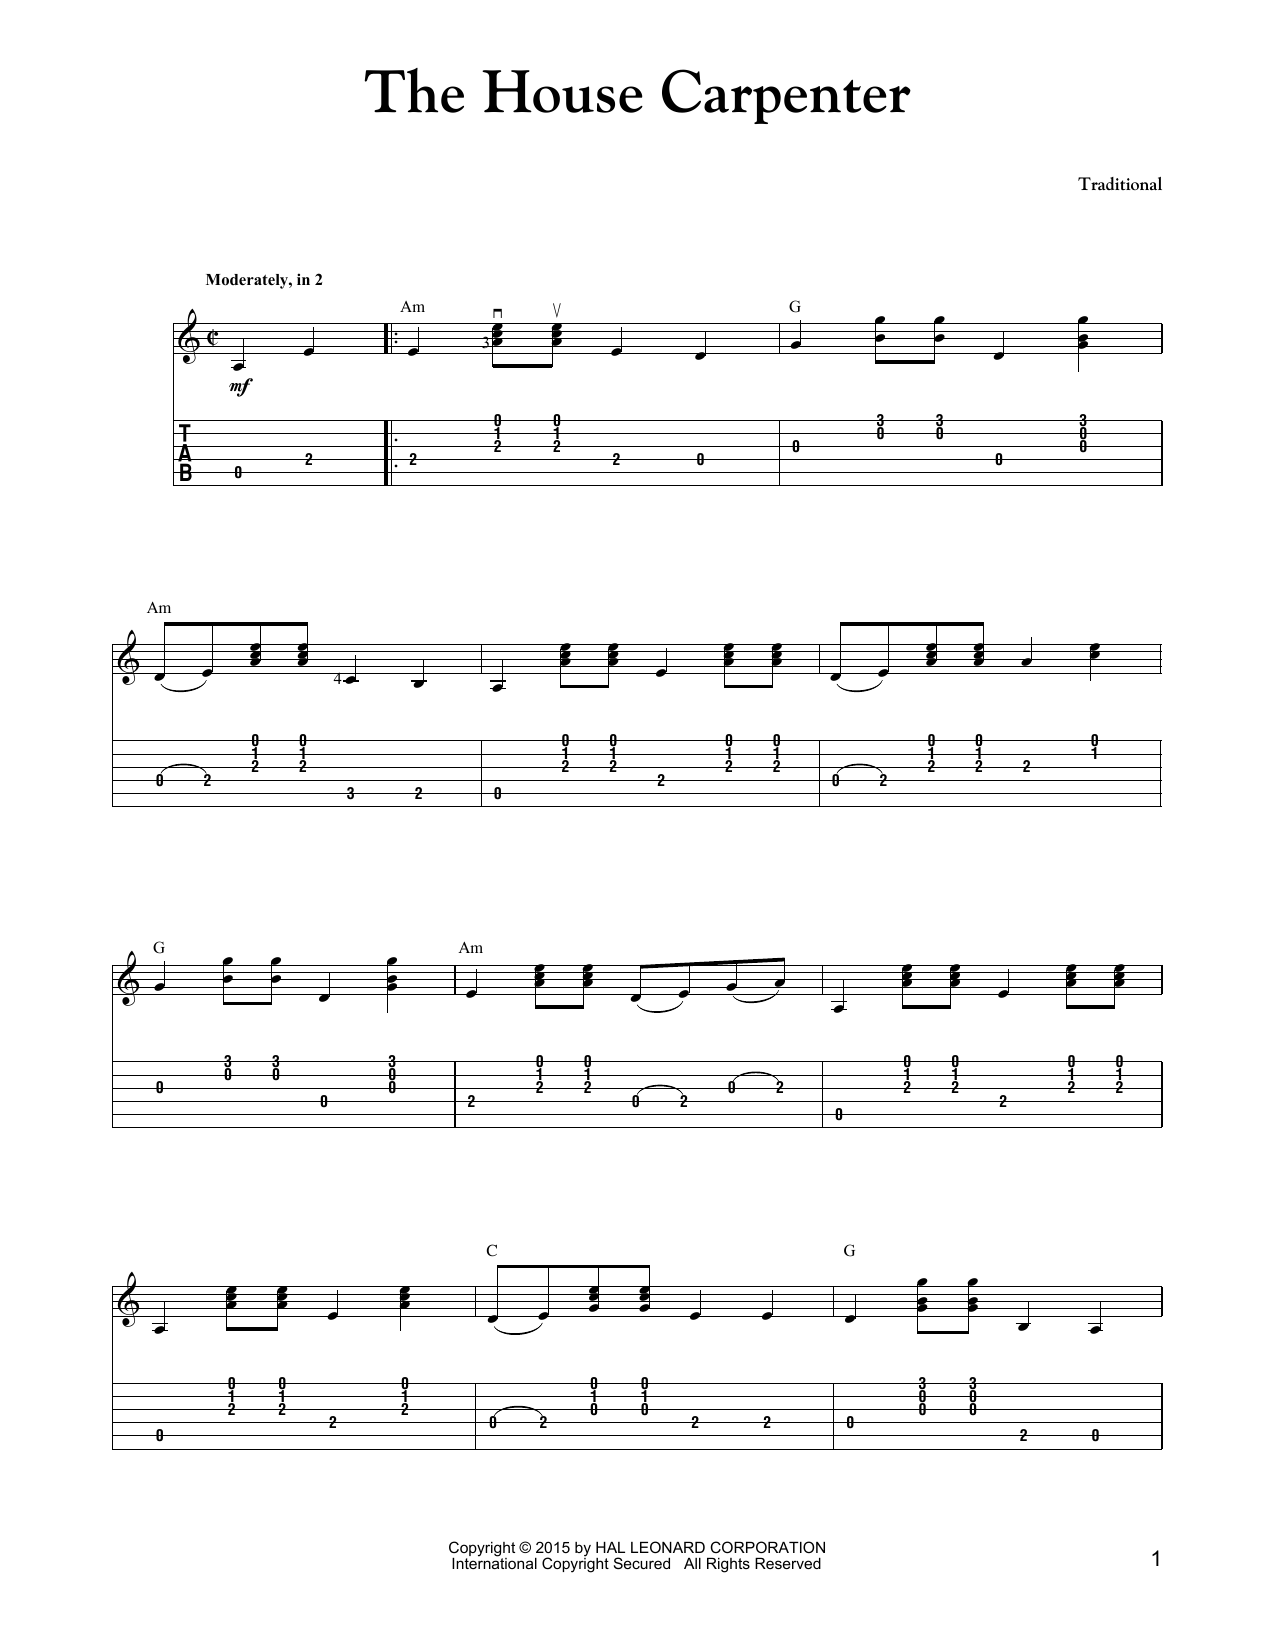 Download Carter Style Guitar The House Carpenter Sheet Music